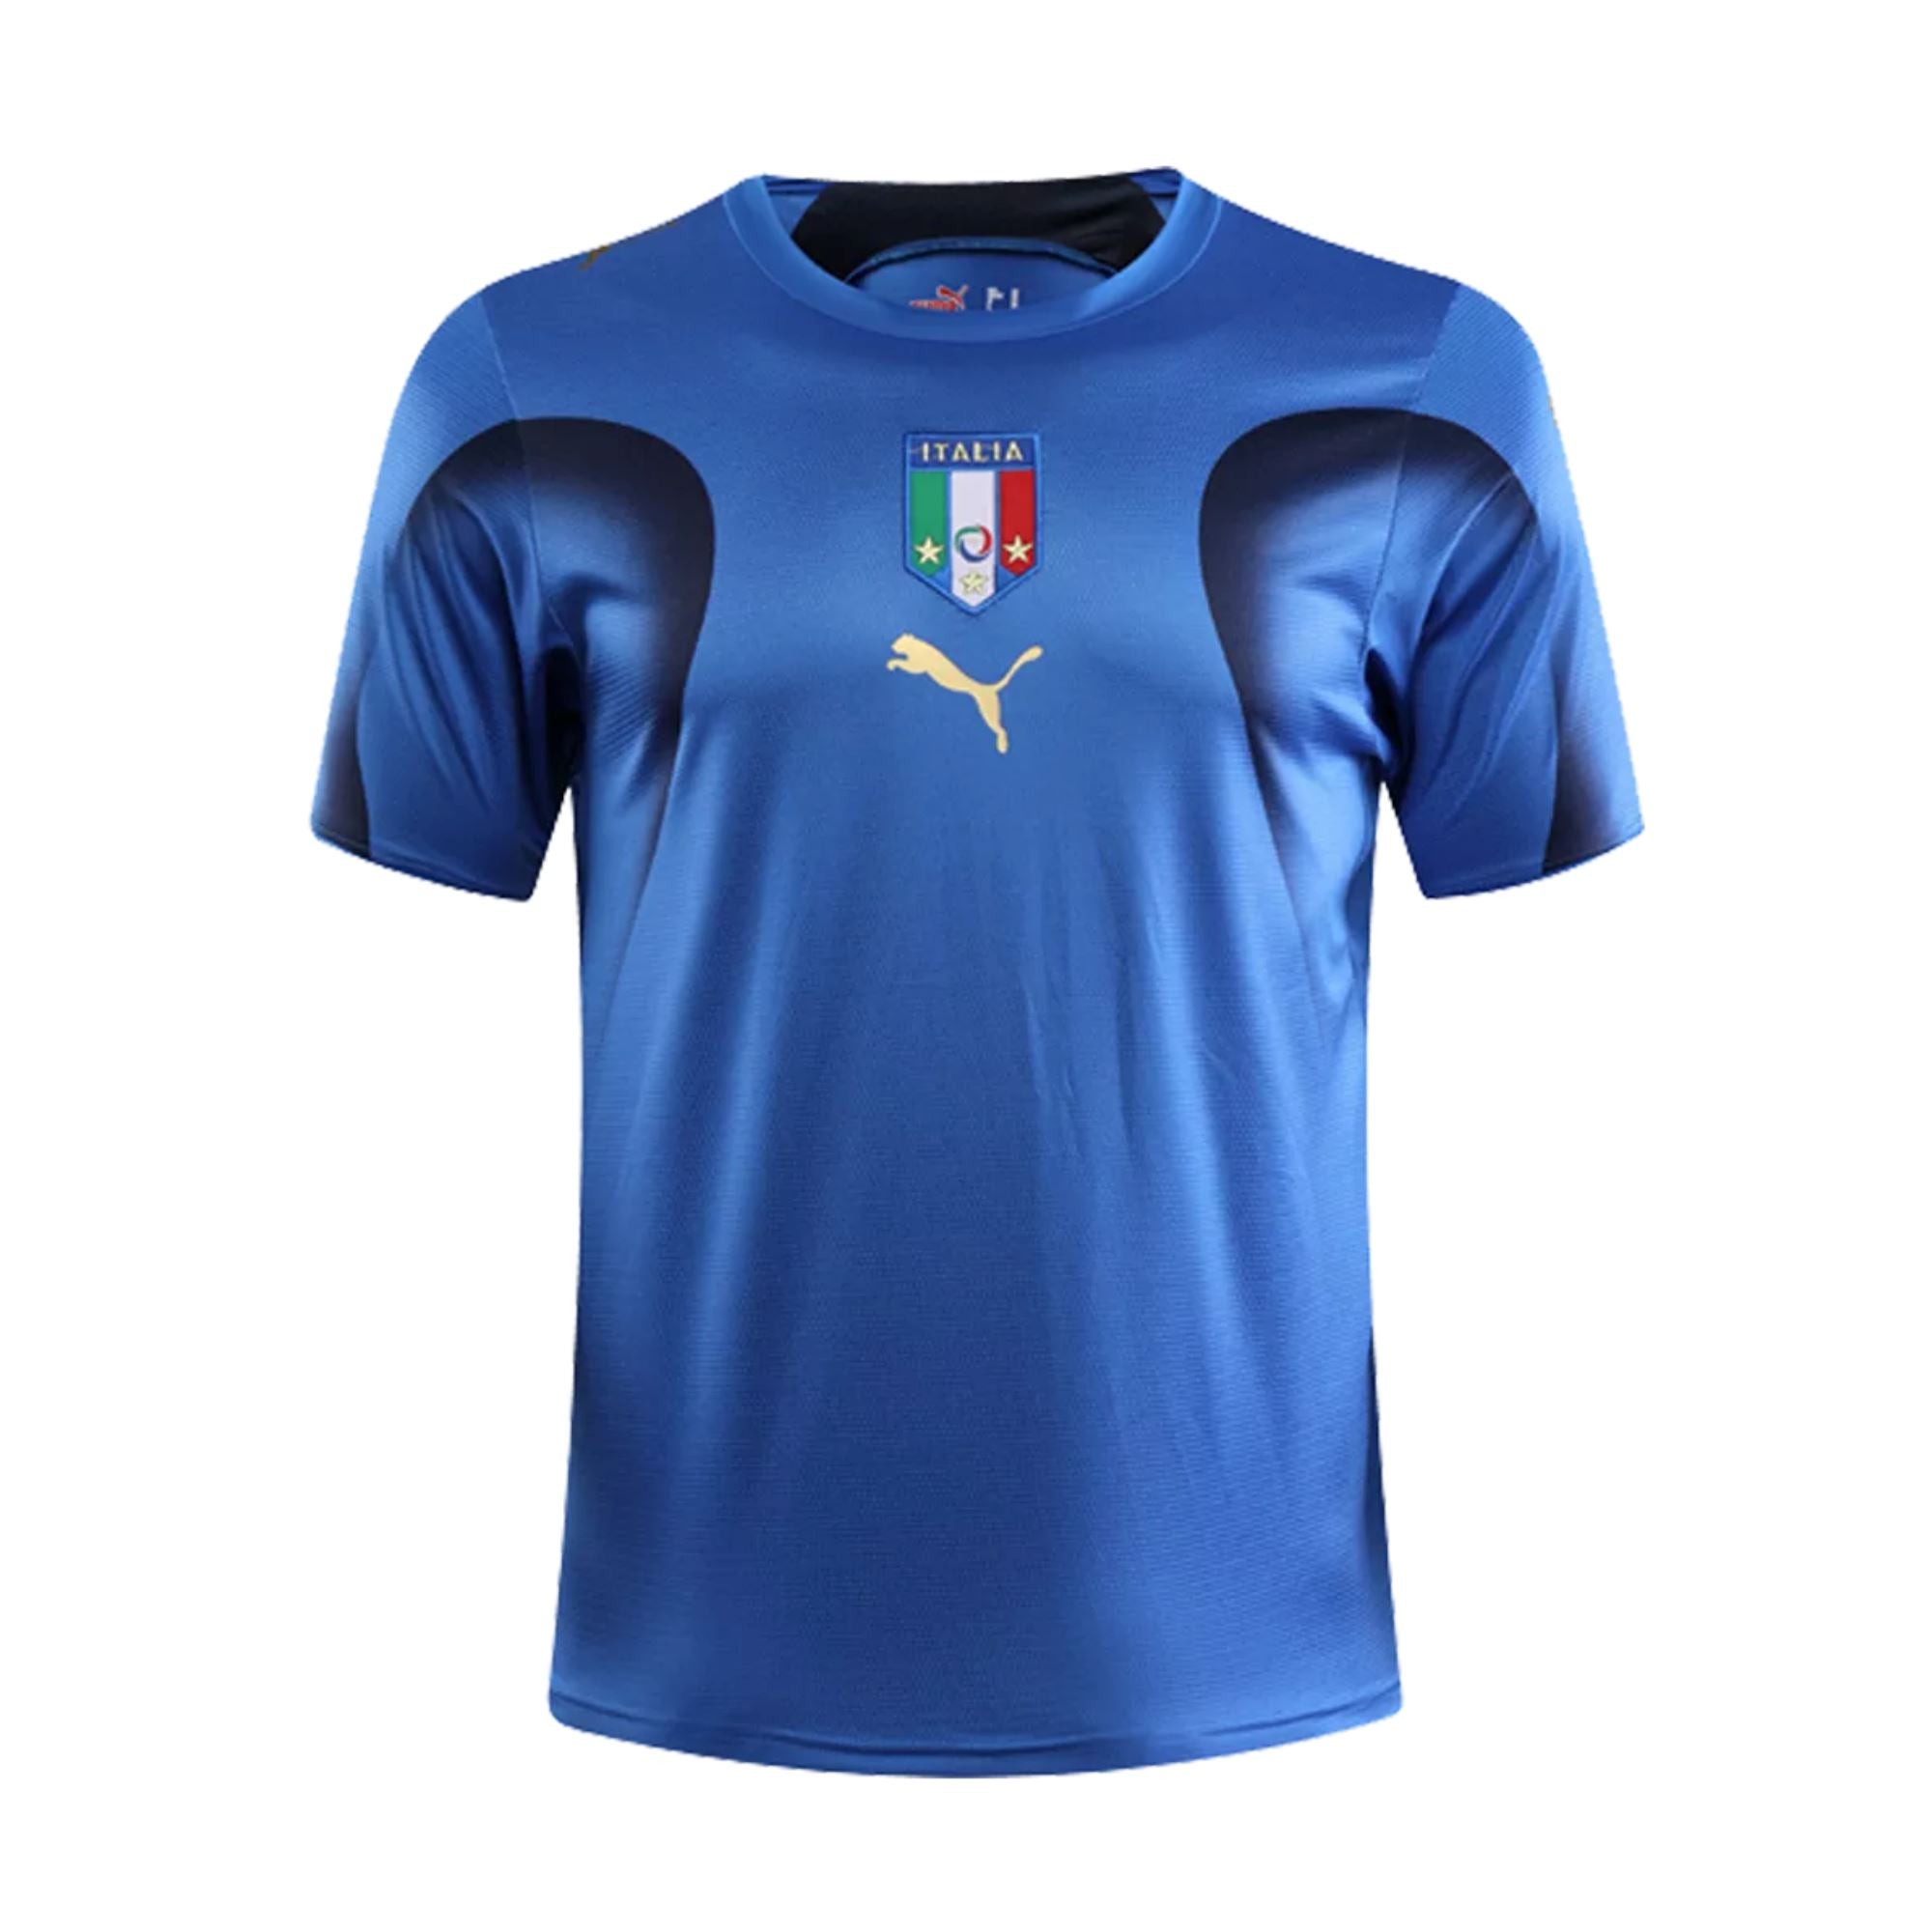 2006 Italy World Cup Home Jersey - ITASPORT